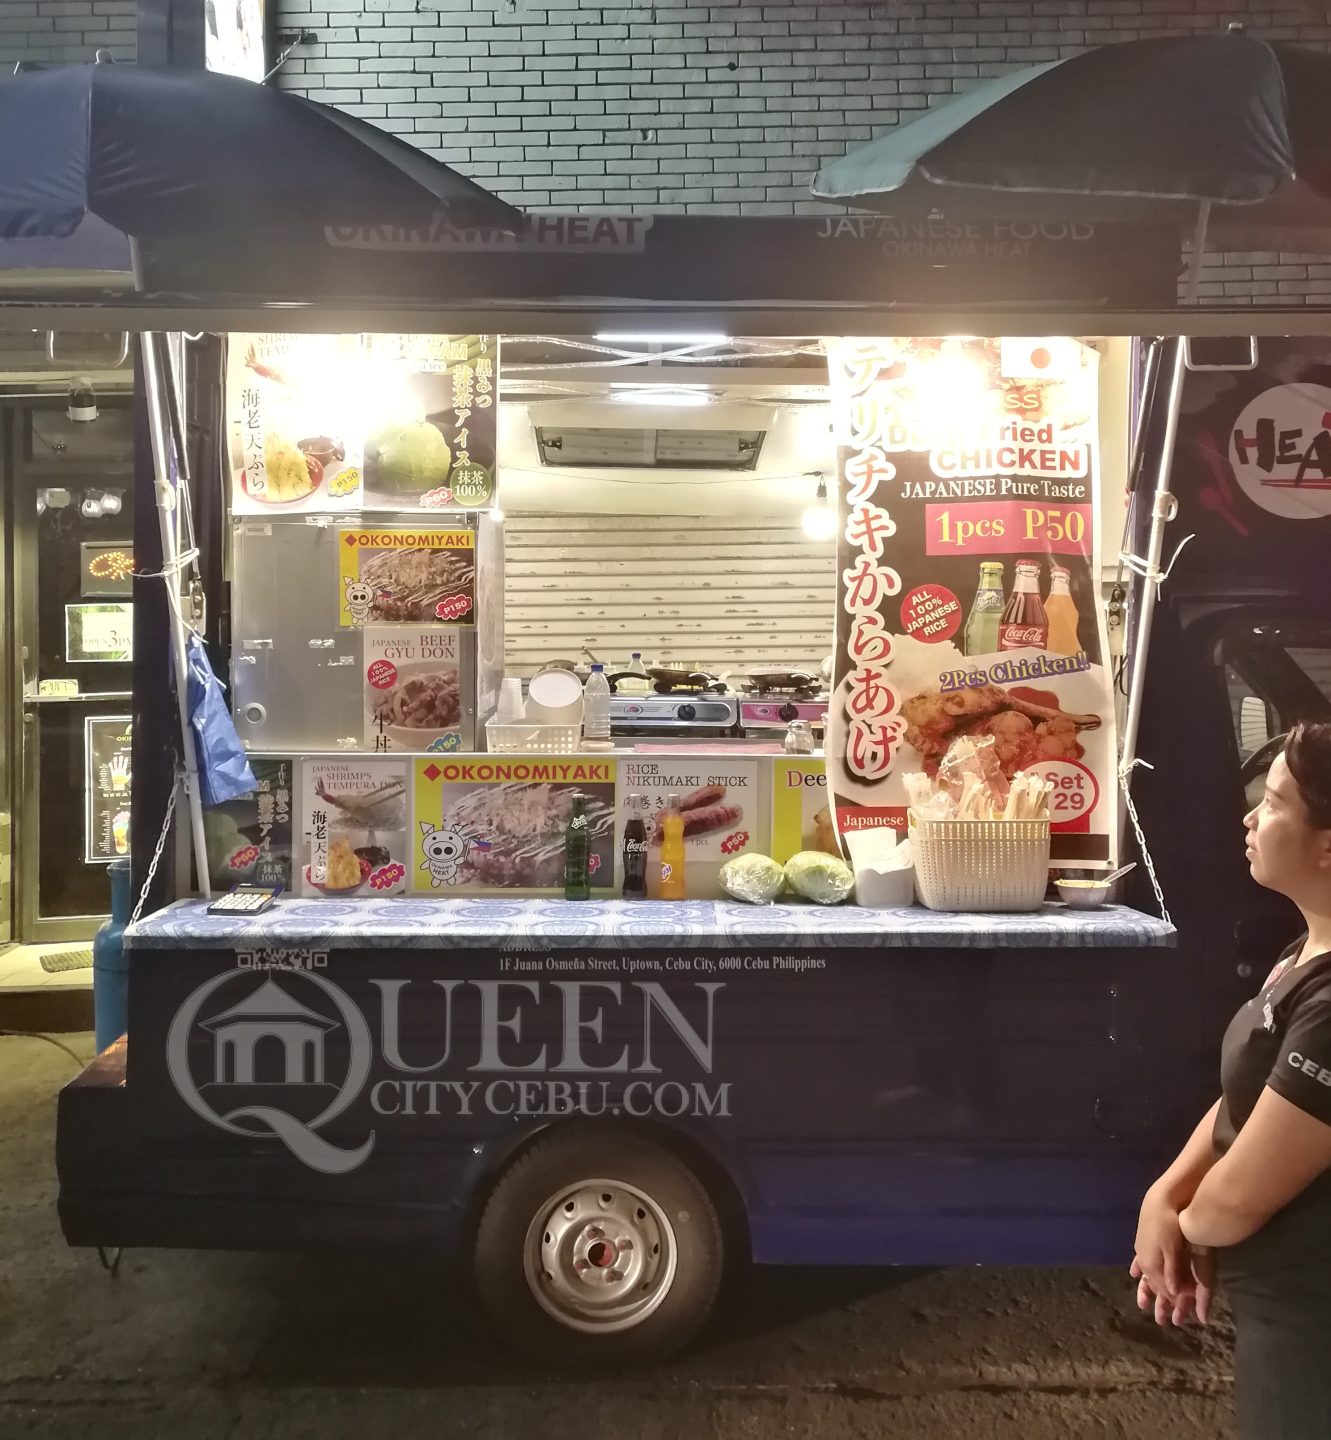 Okinawa Heat Japanese Food Truck Front View